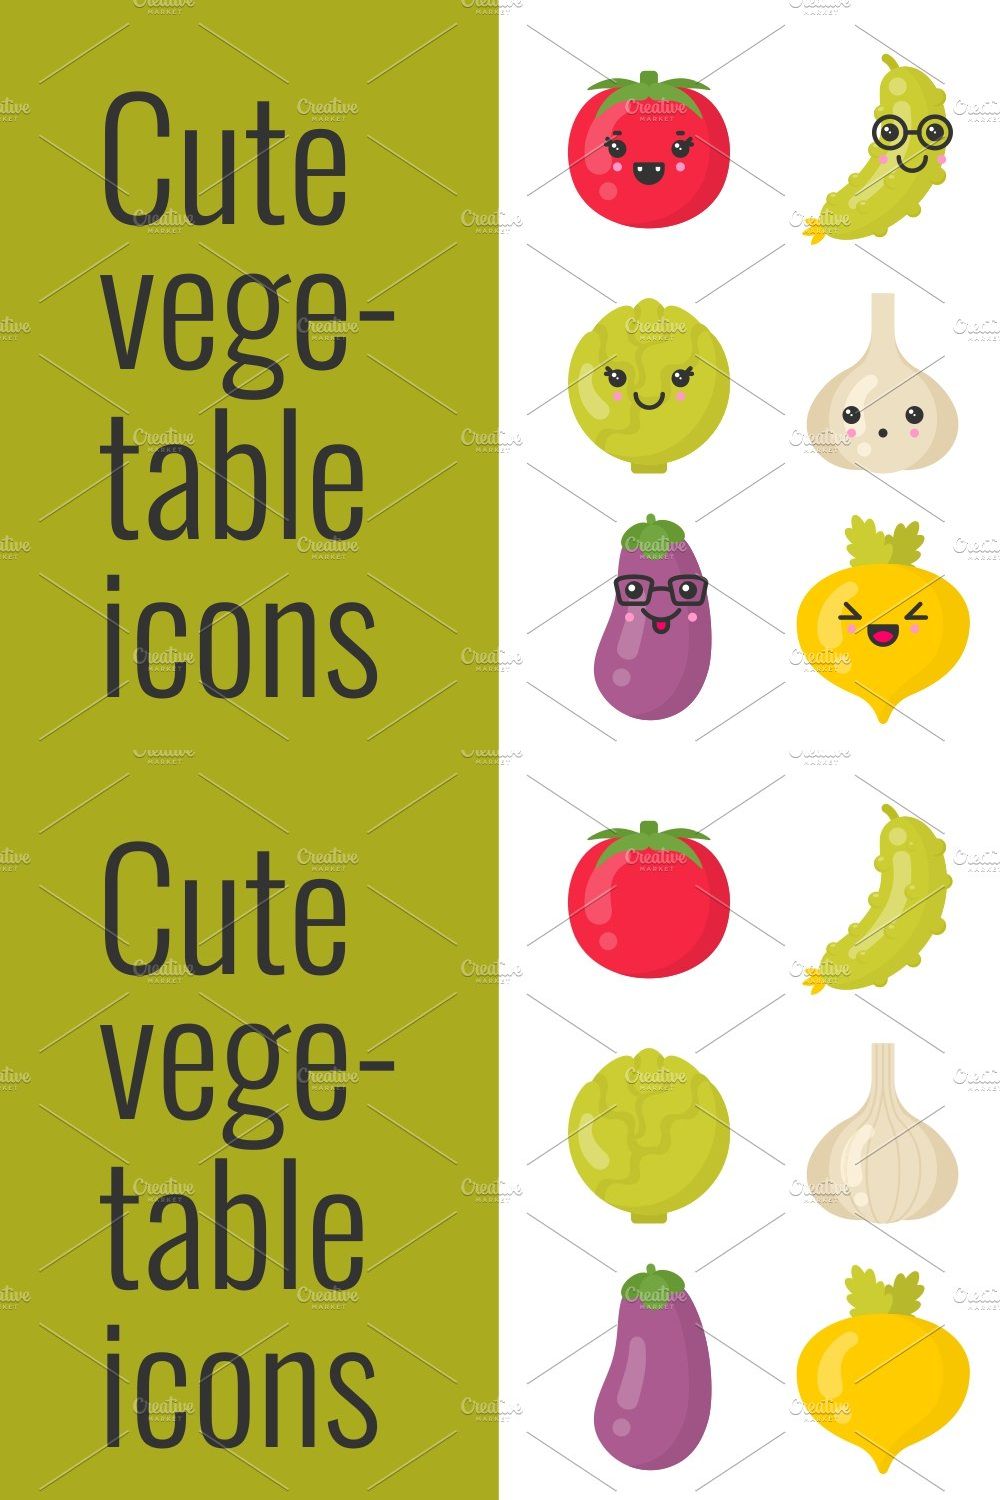 Cute vegetable icons pinterest preview image.